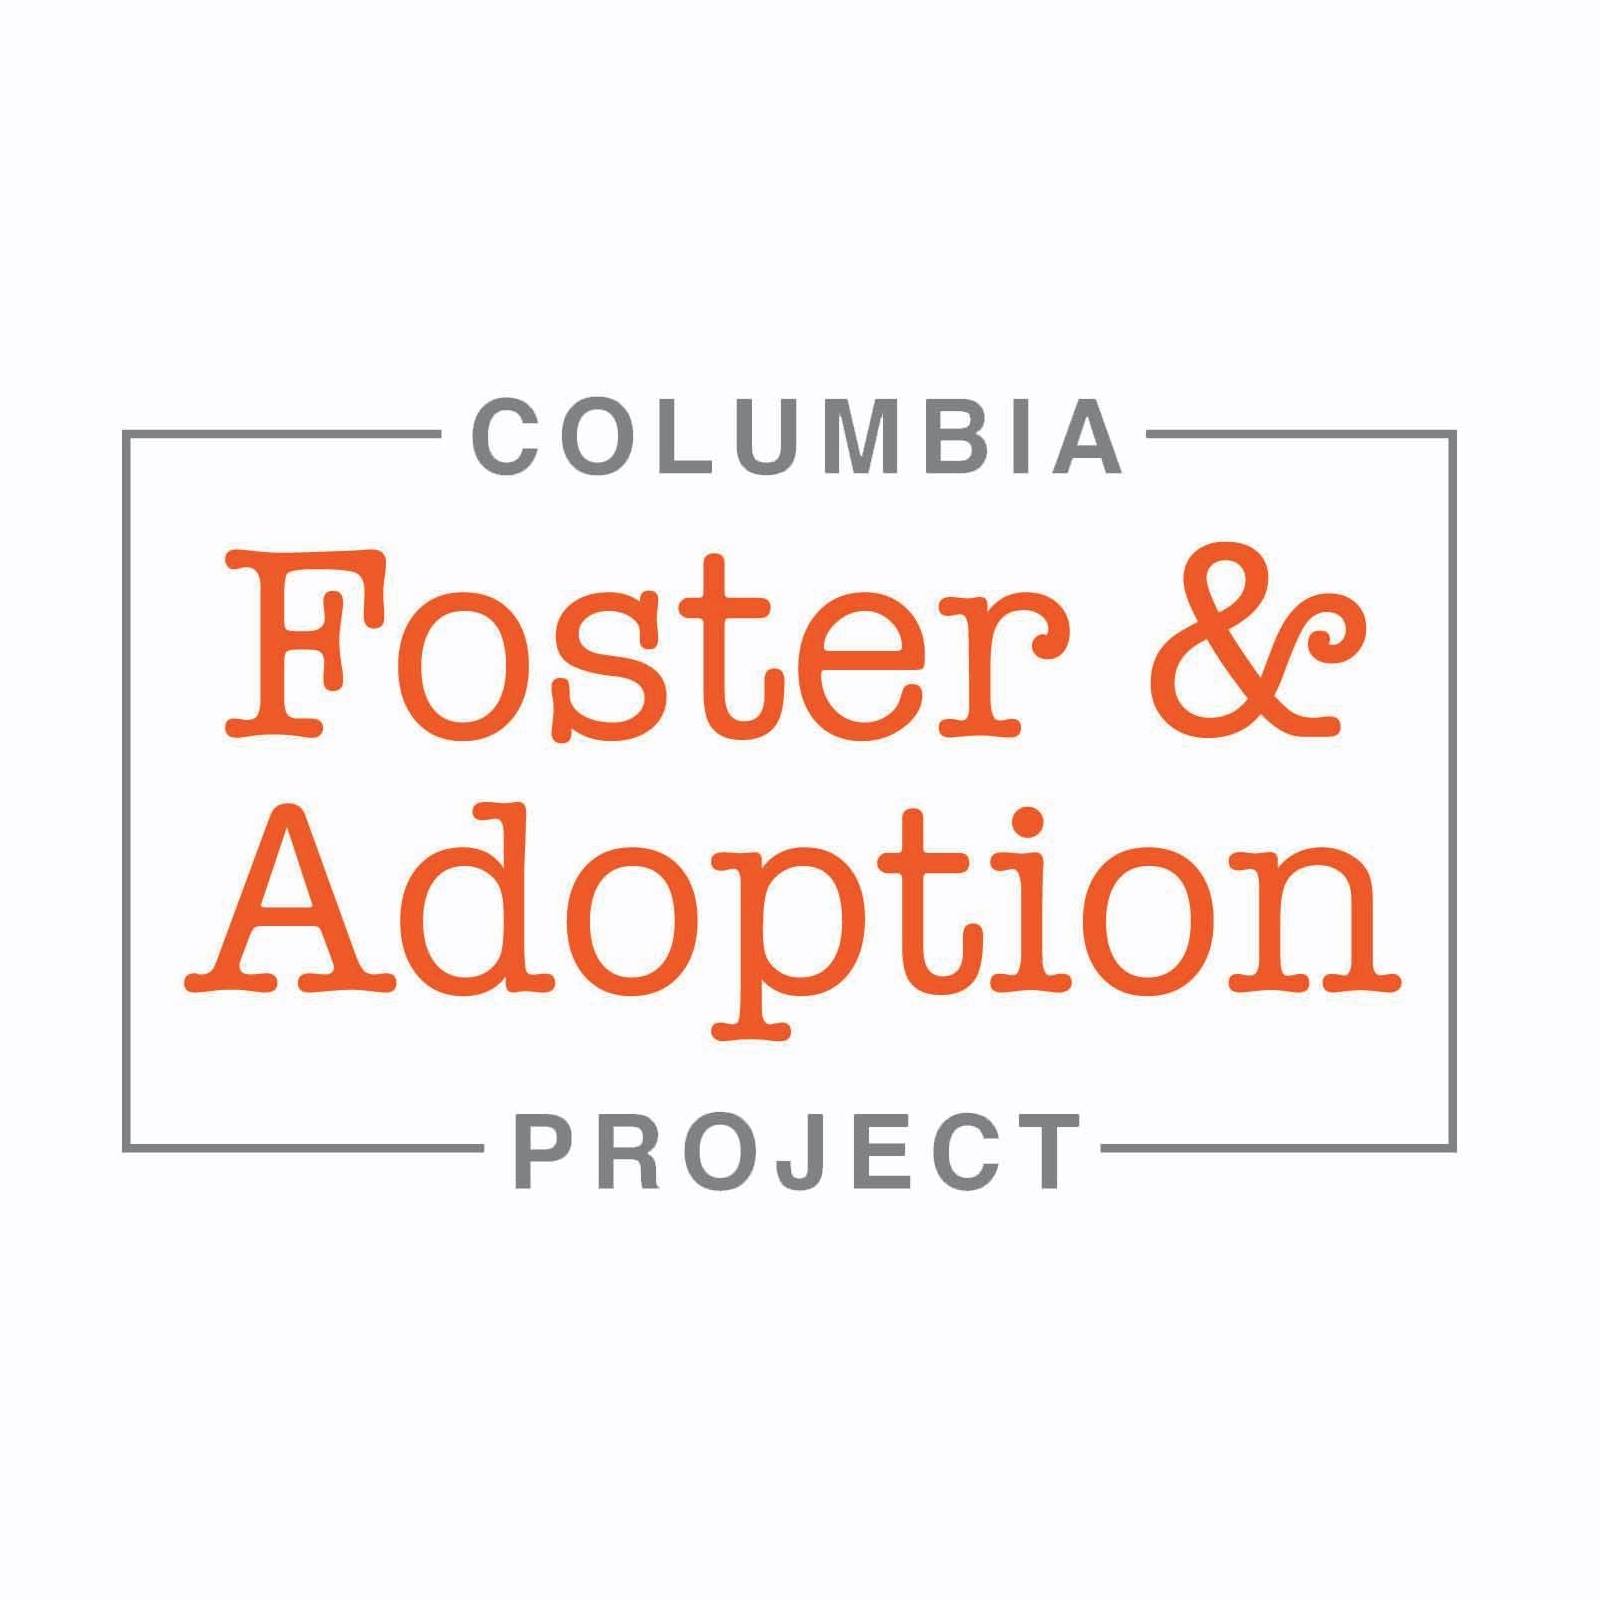 Columbia Foster & Adoption Project